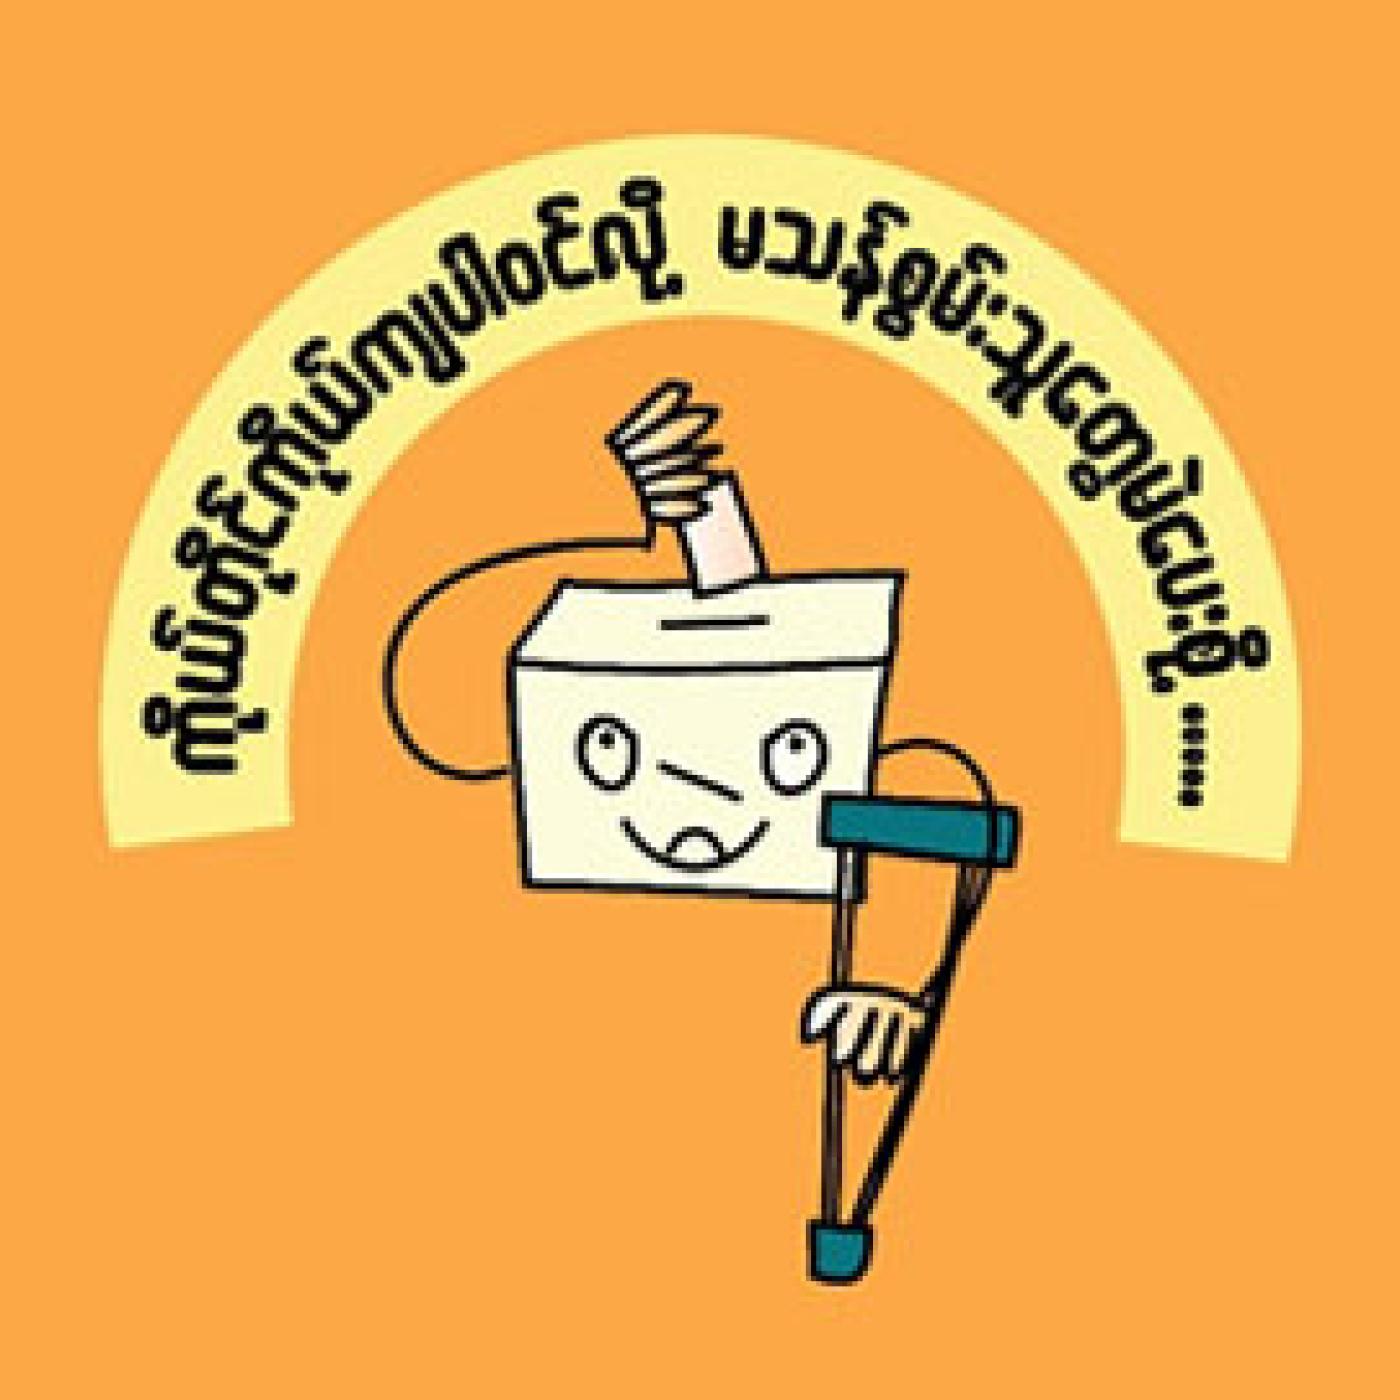 The logo for the Myanmar Independent Living Initiative.